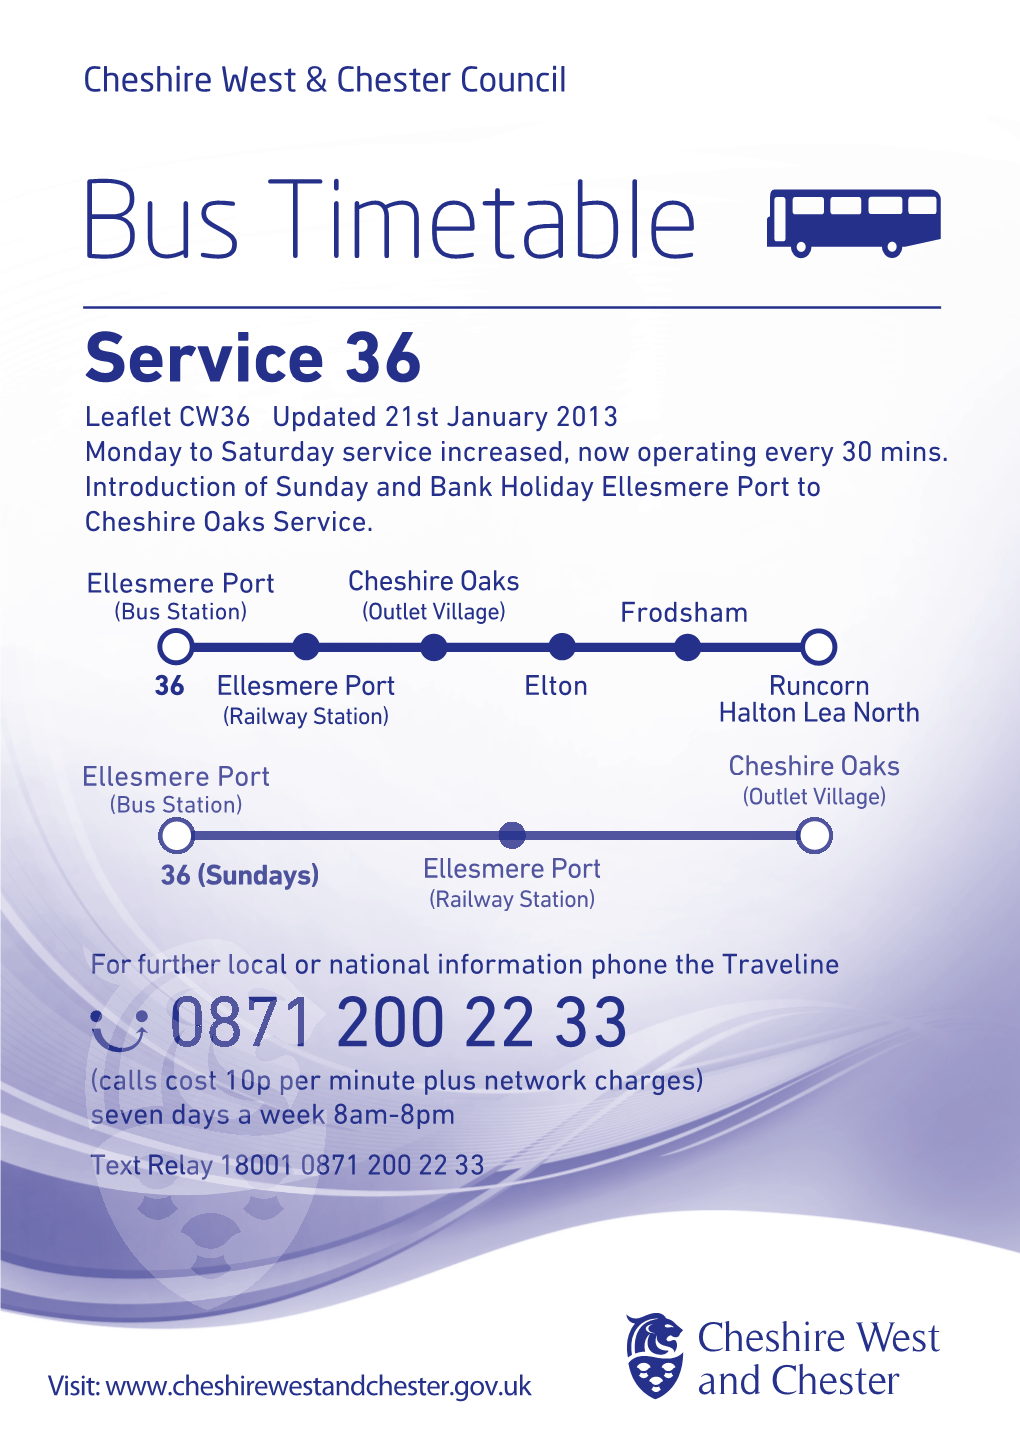 Bus Timetable Service 36 Leaﬂet CW36 Updated 21St January 2013 Monday to Saturday Service Increased, Now Operating Every 30 Mins